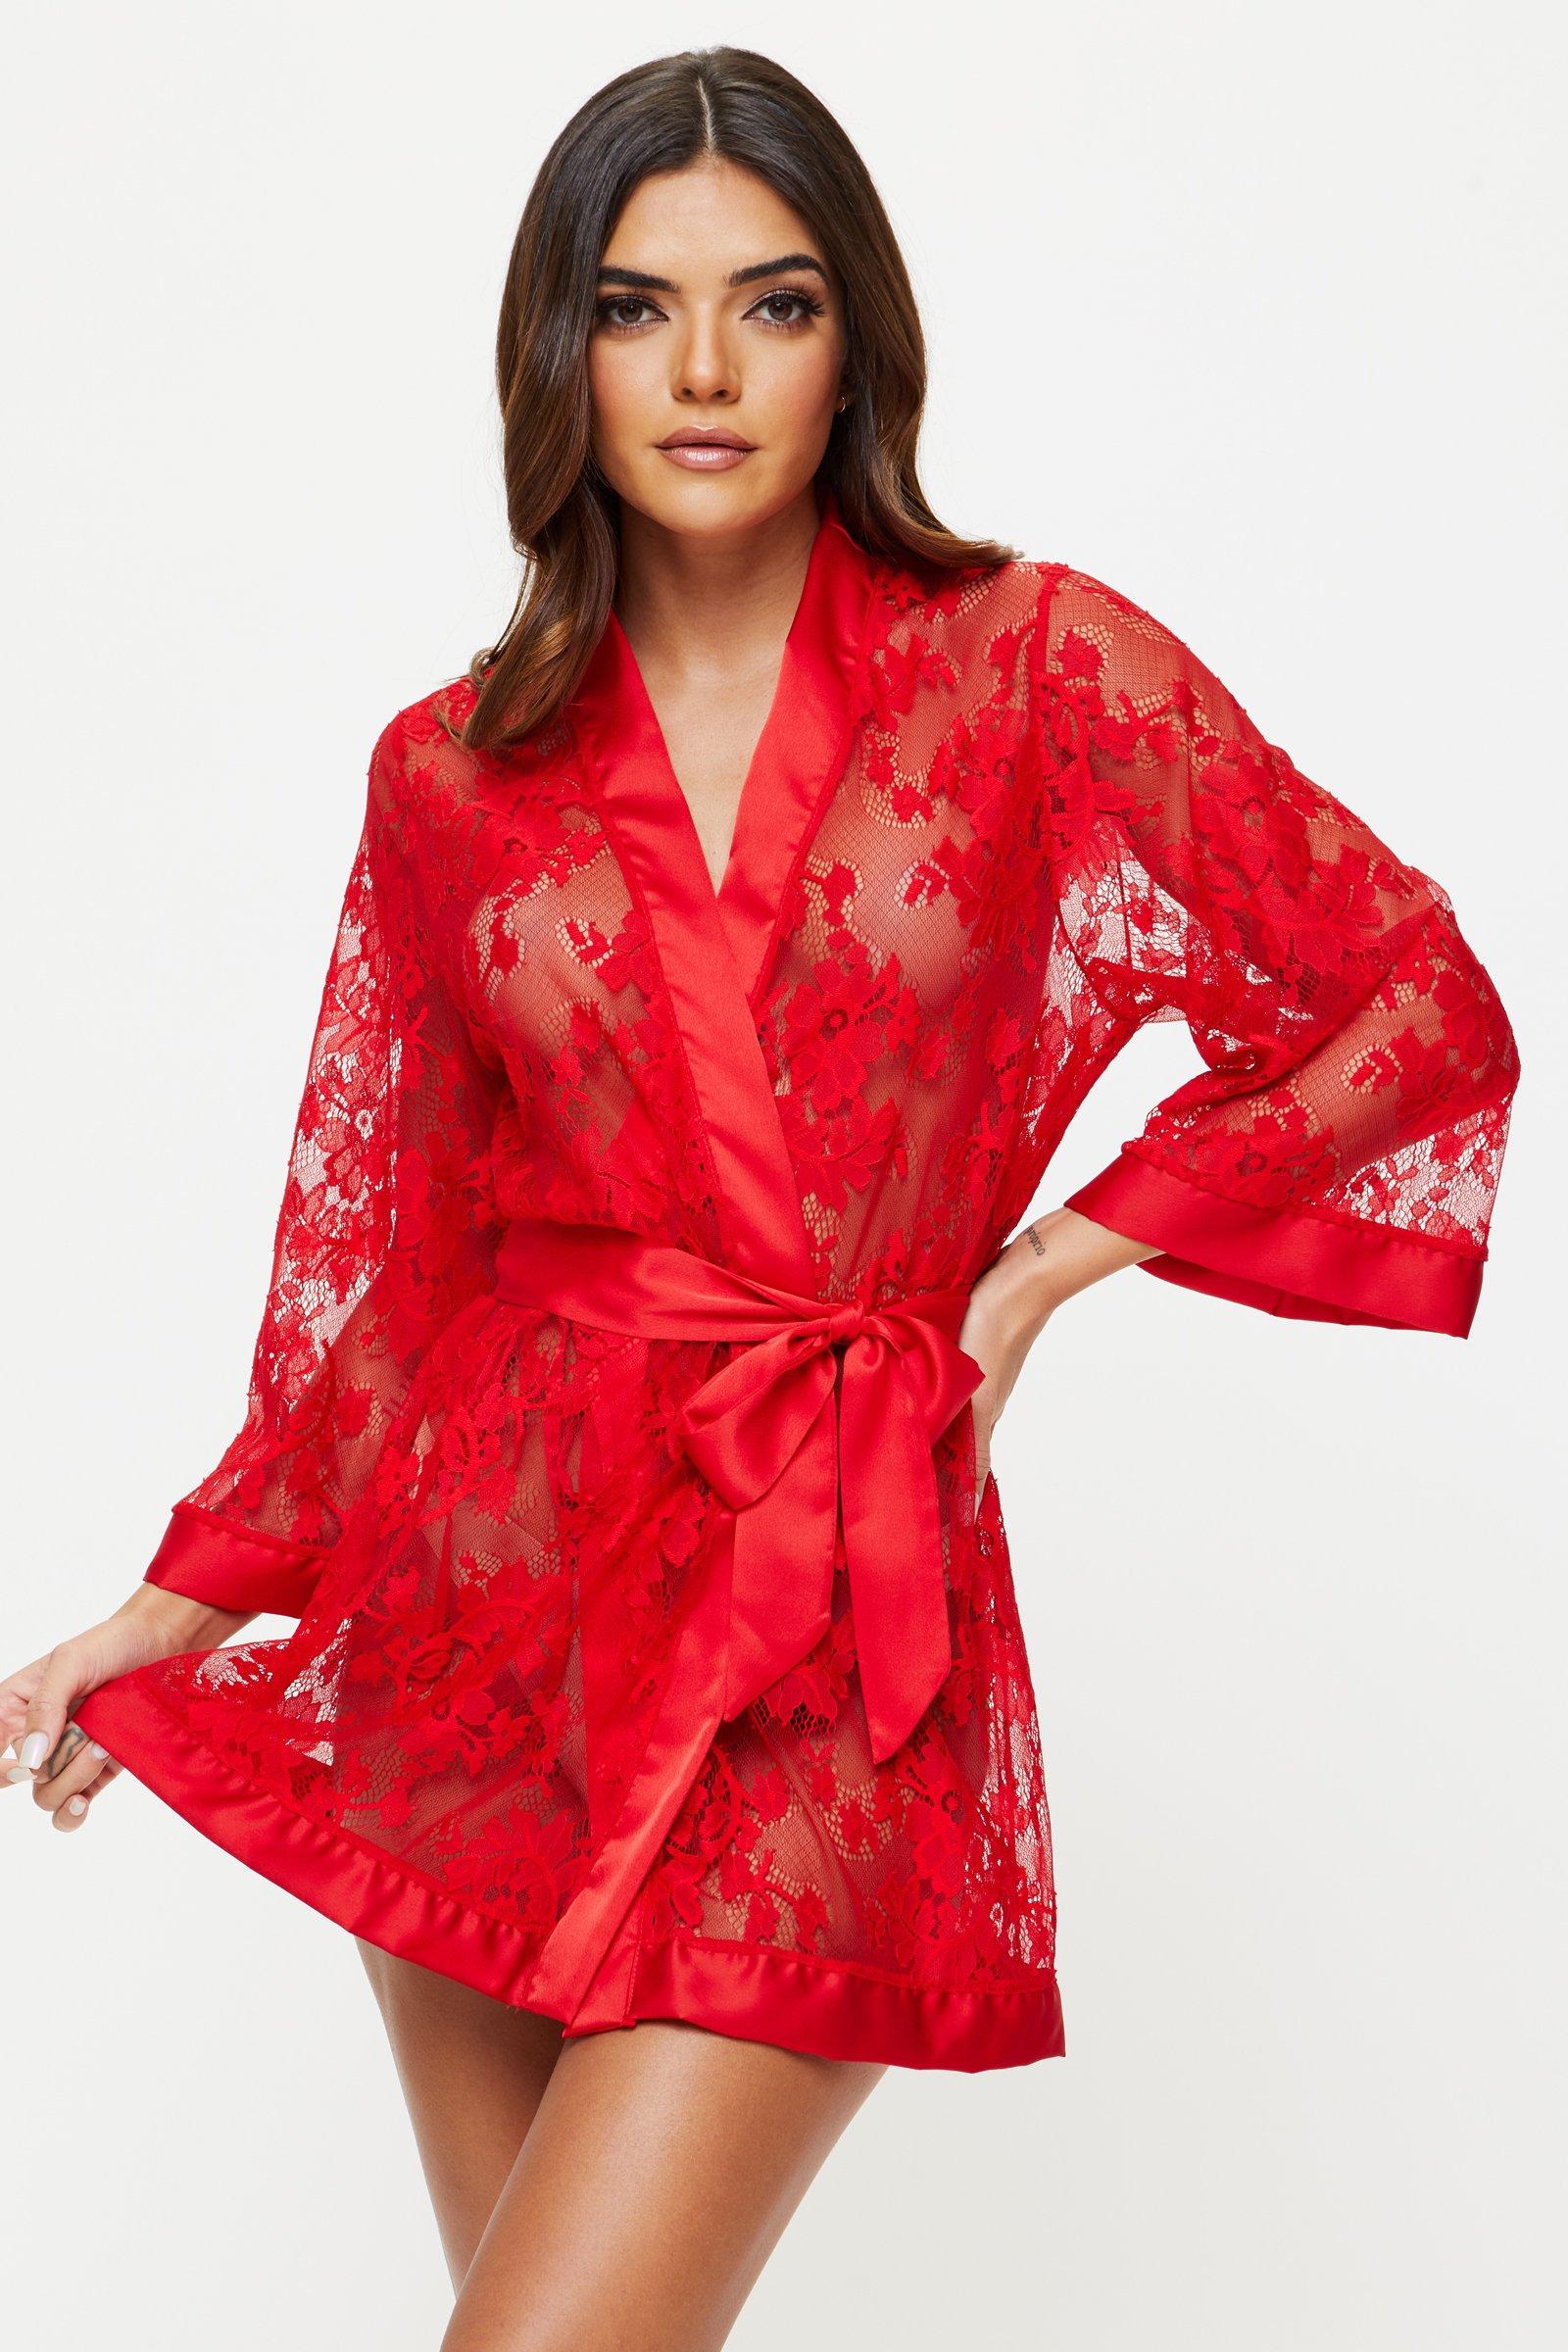 Ann Summers Supreme long sleeve lace dress with plunge front detail in red